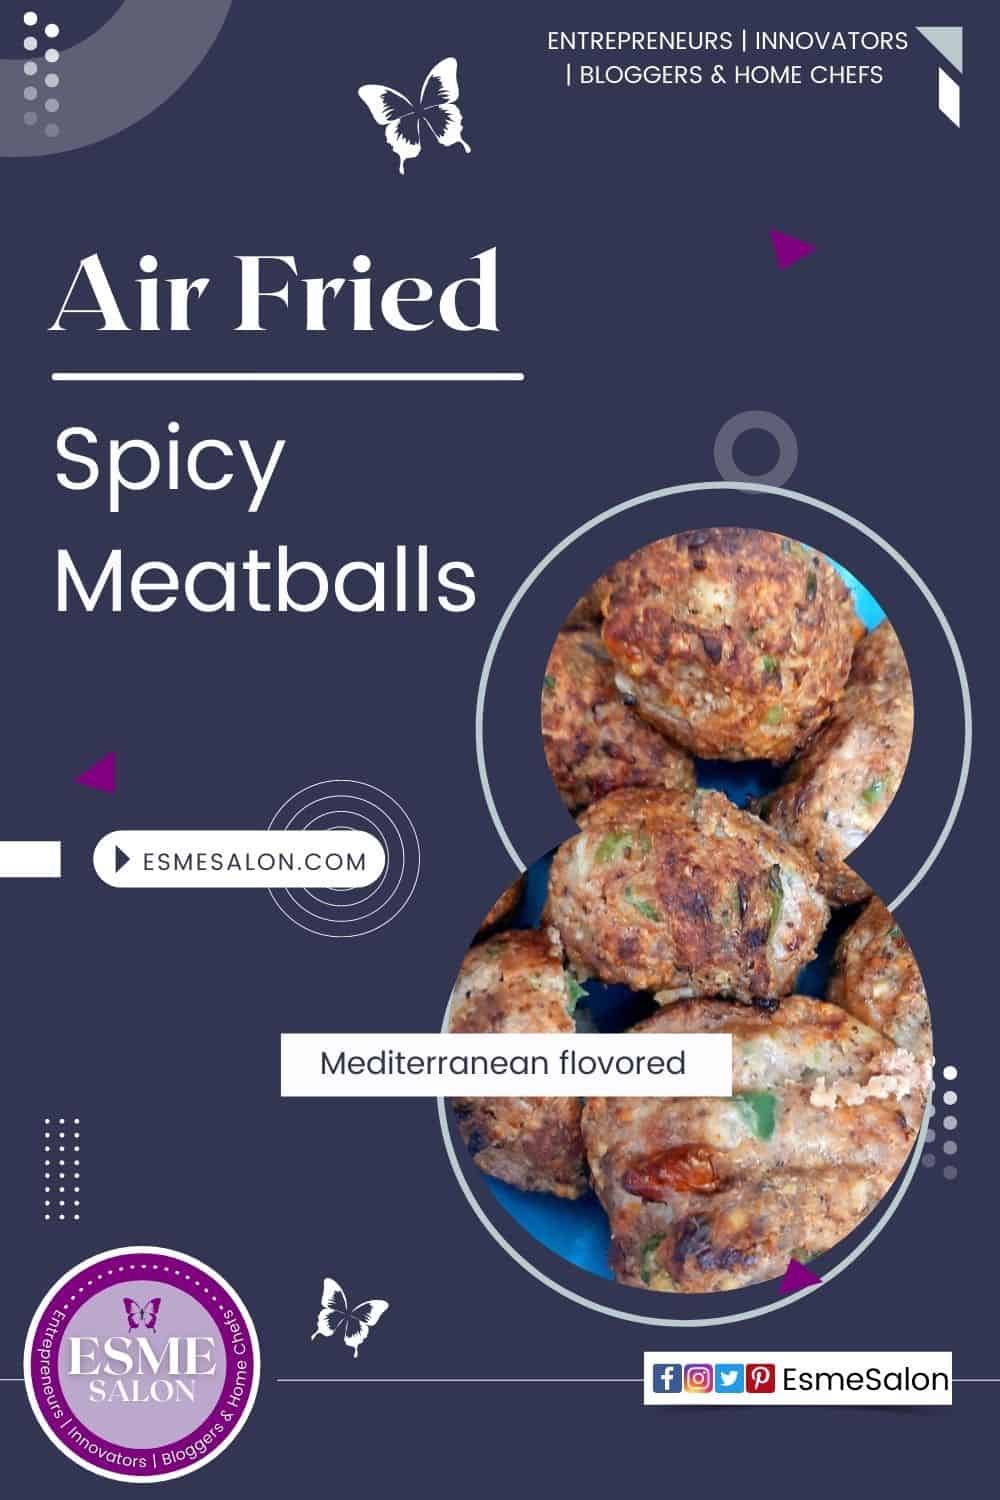 Fried Meatballs with chopped coriander and spices